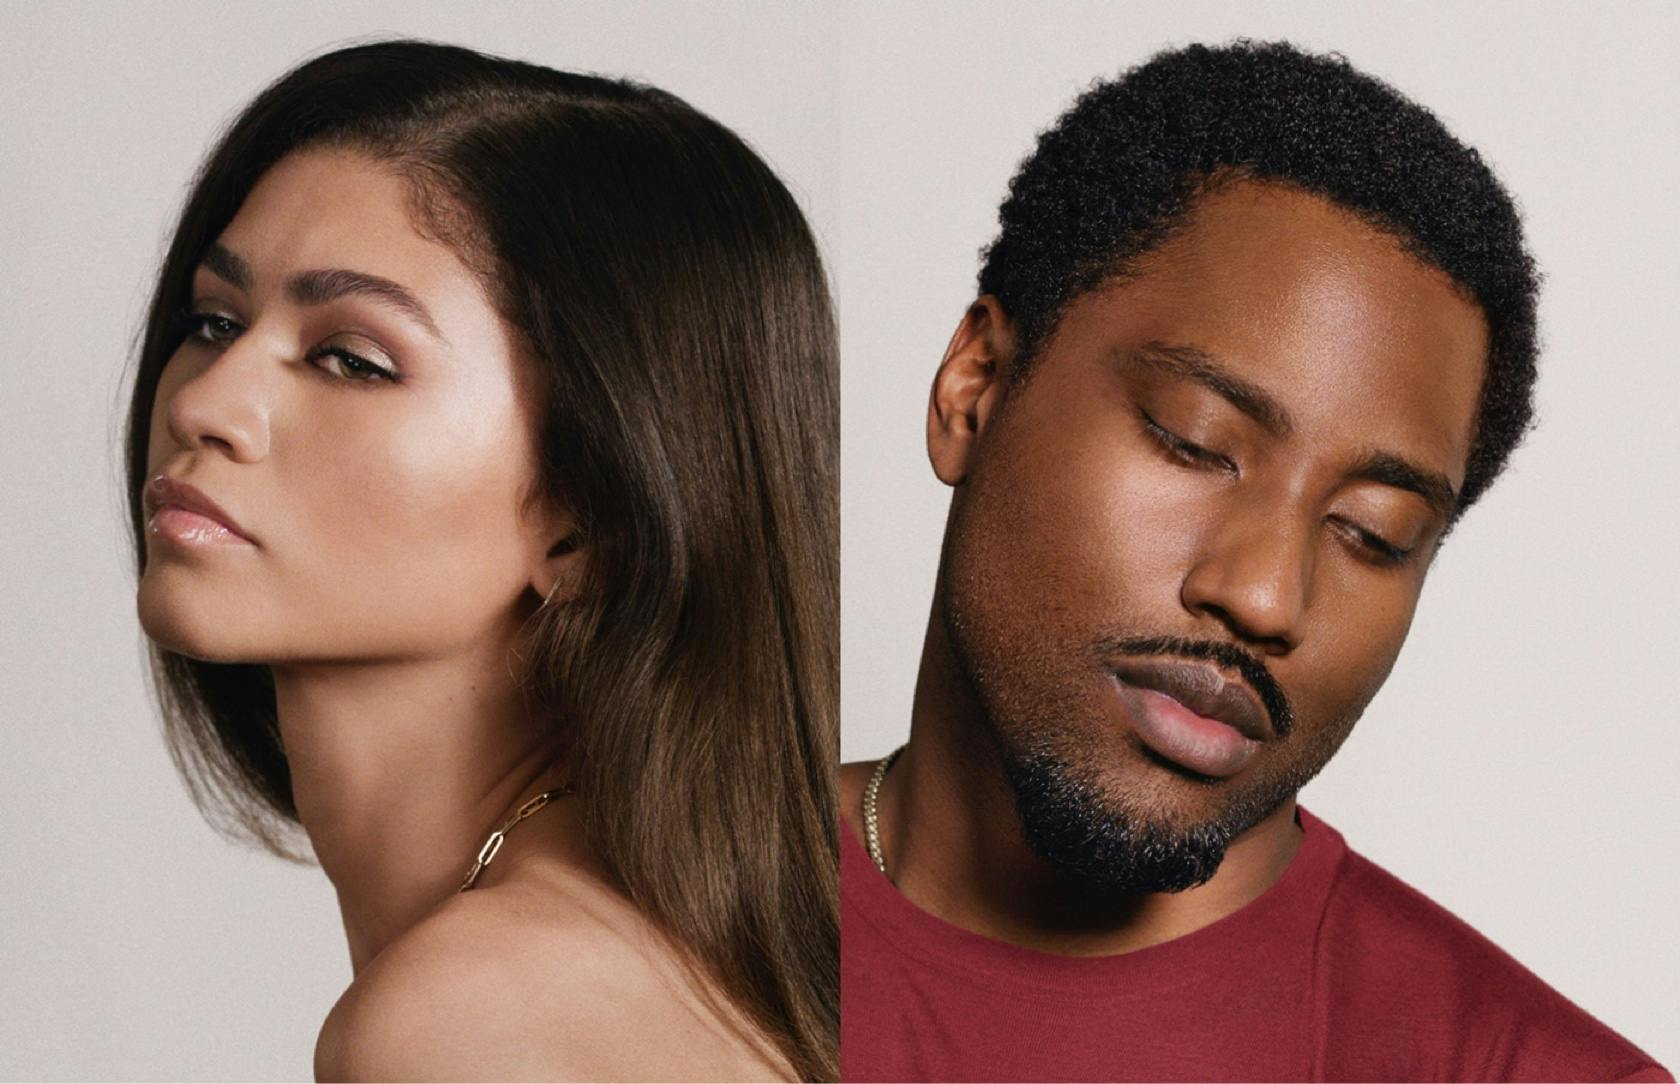 Portraits of Zendaya and John David Washington. Zendaya appears in profile with her hair down. Washington, wearing a red sweater, casts his eyes downwards.